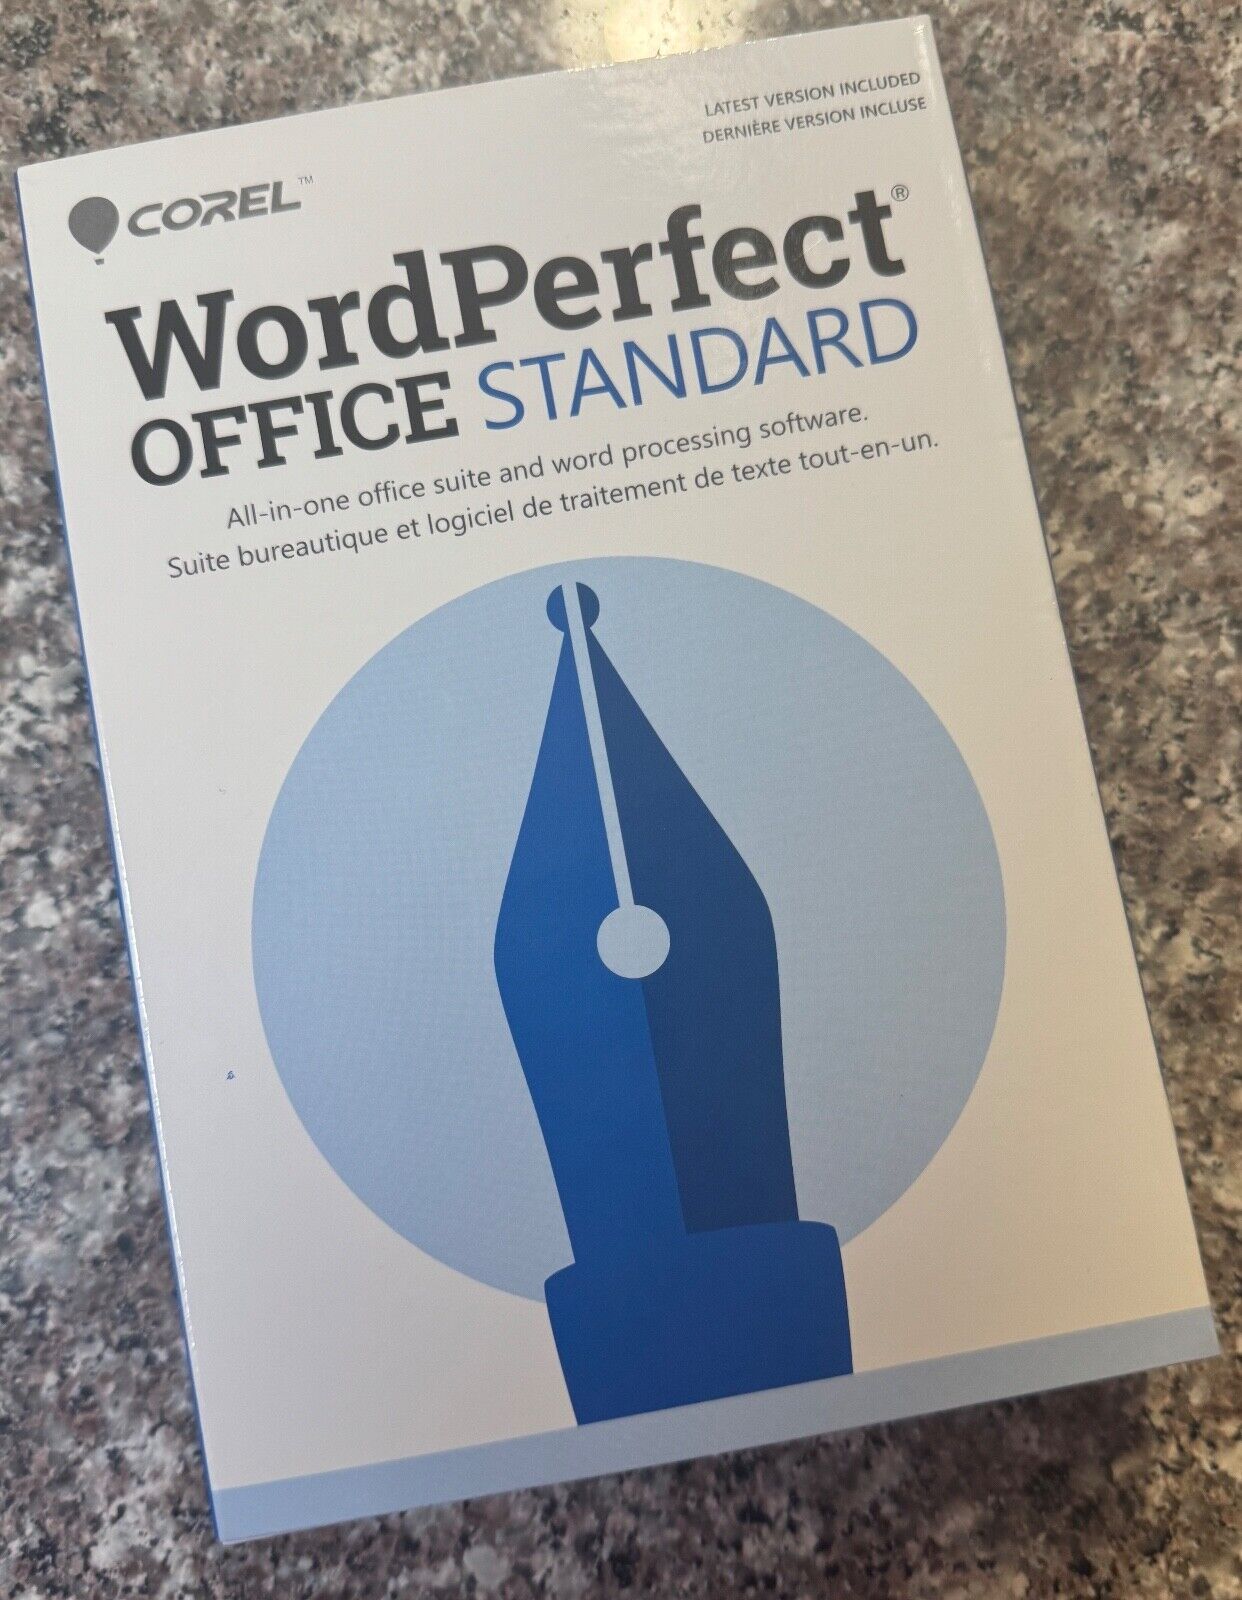 COREL WordPerfect Office Standard - LATEST VERSION INCLUDED - NEW & SEALED